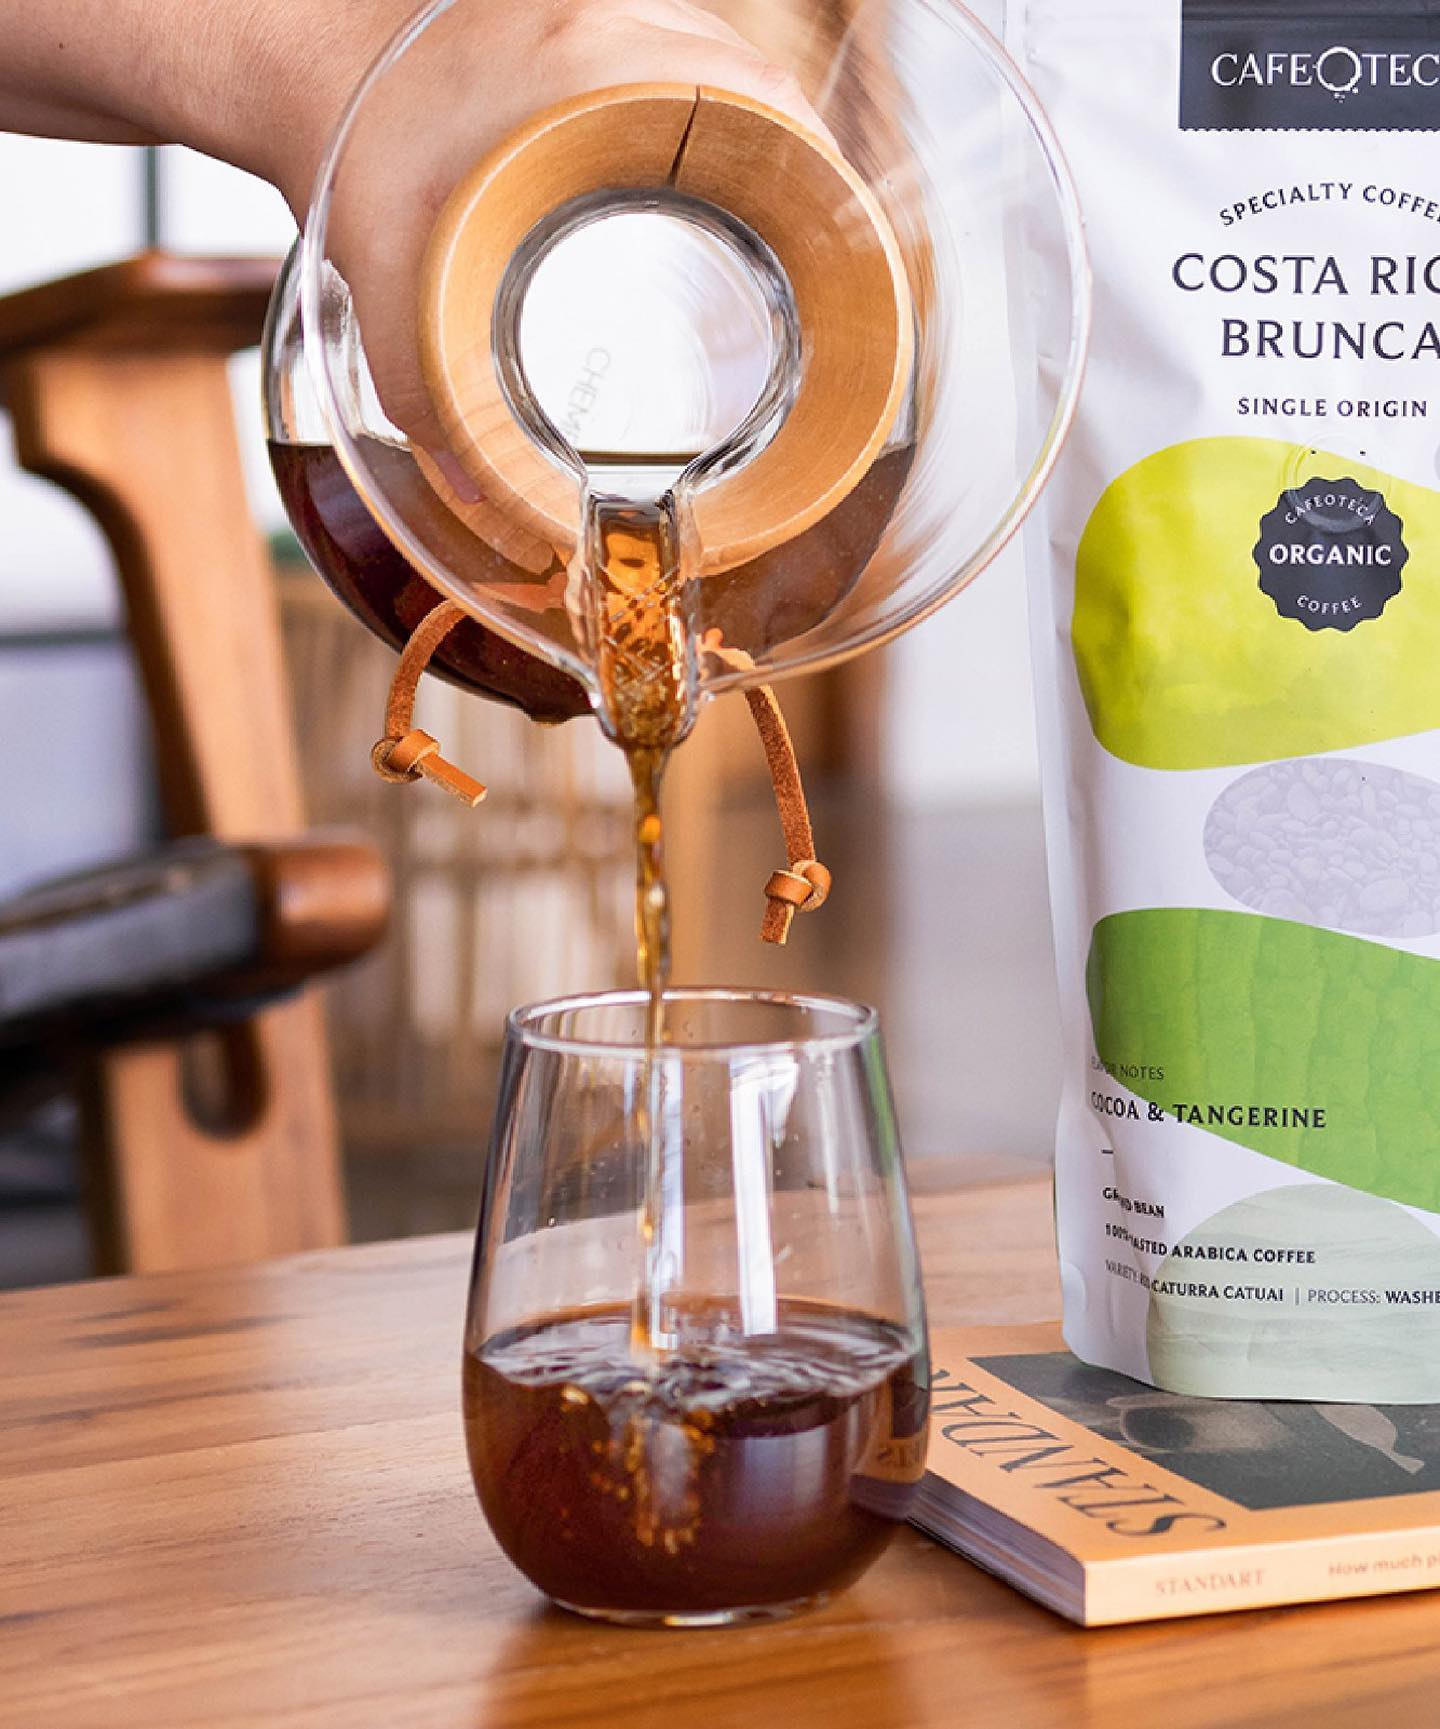 Ready to experience the best of Costa Rican coffee culture? Swing by Cafeoteca in Barrio Escalante!